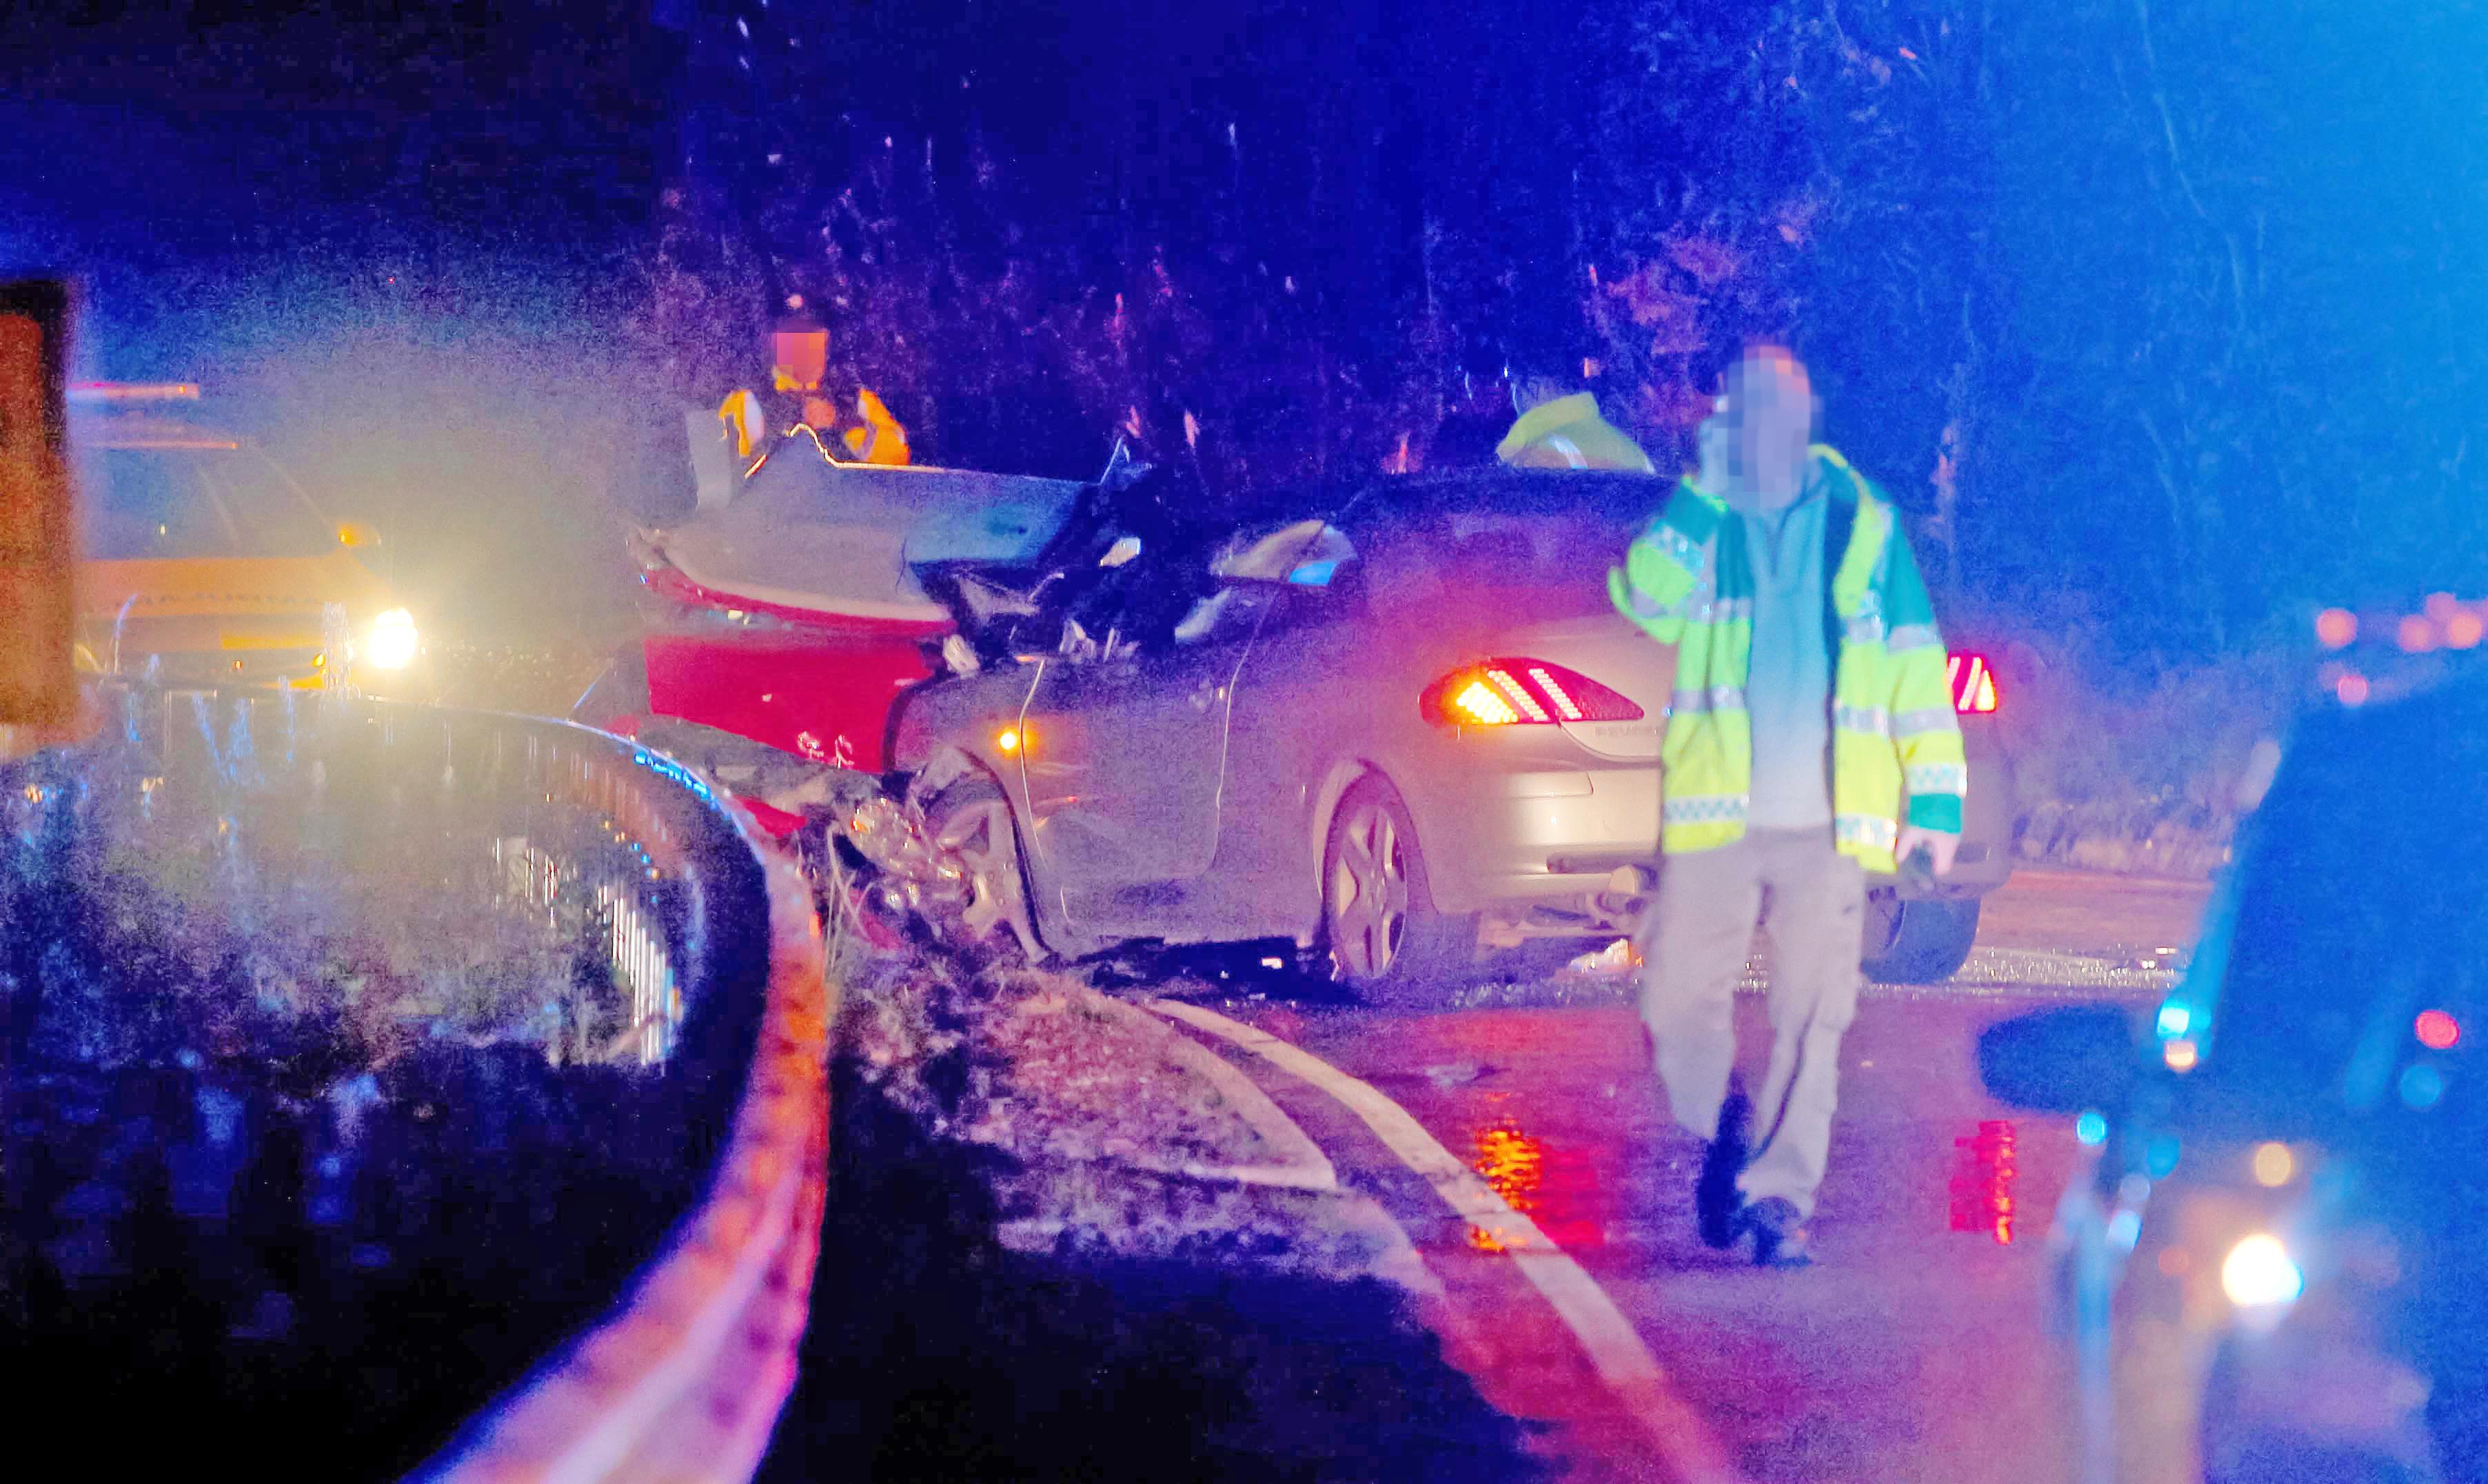 First-responders at the scene of the accident which took place around 10.30pm last night